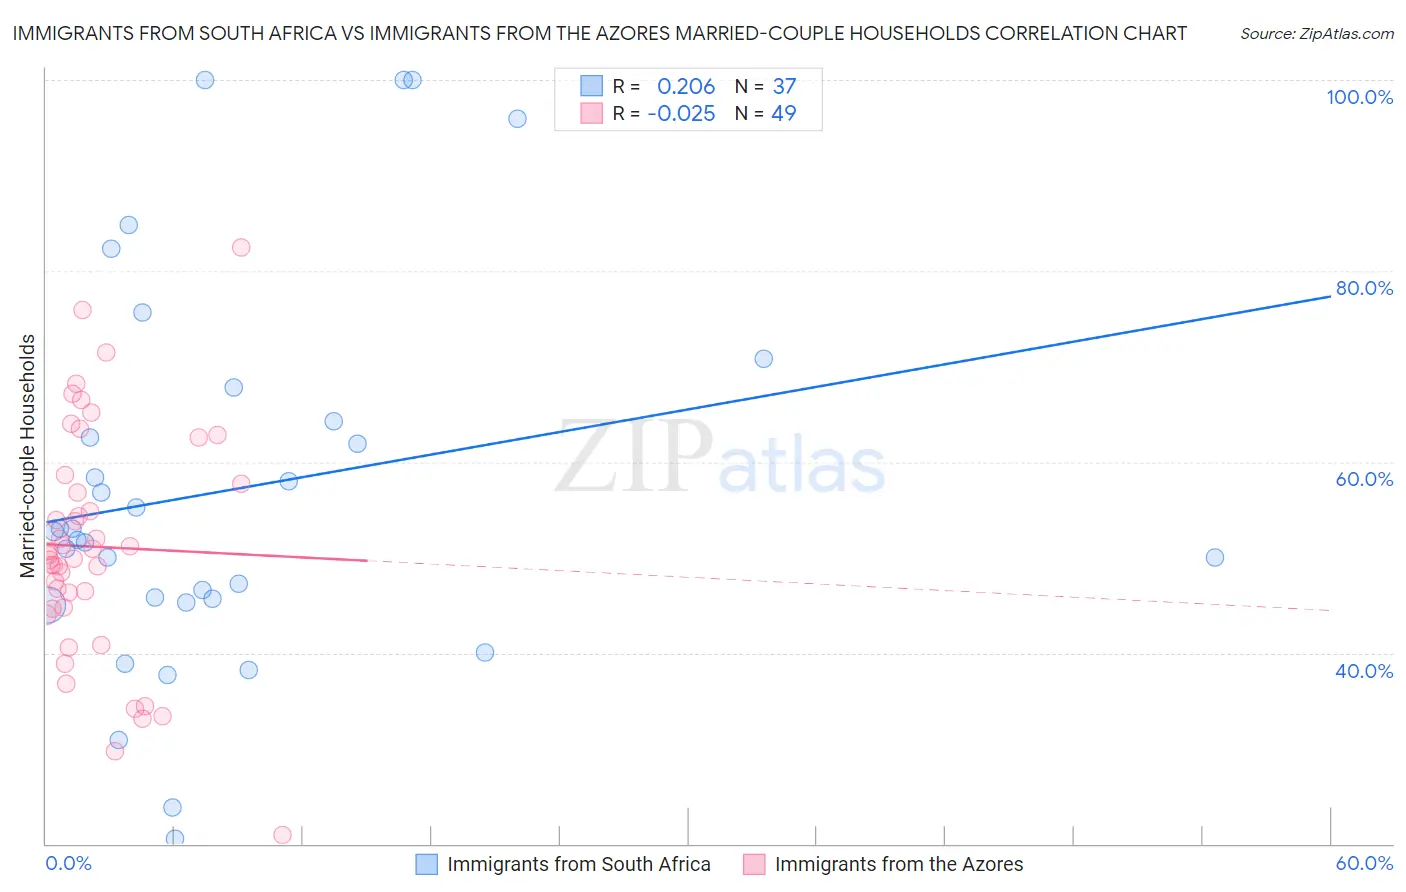 Immigrants from South Africa vs Immigrants from the Azores Married-couple Households